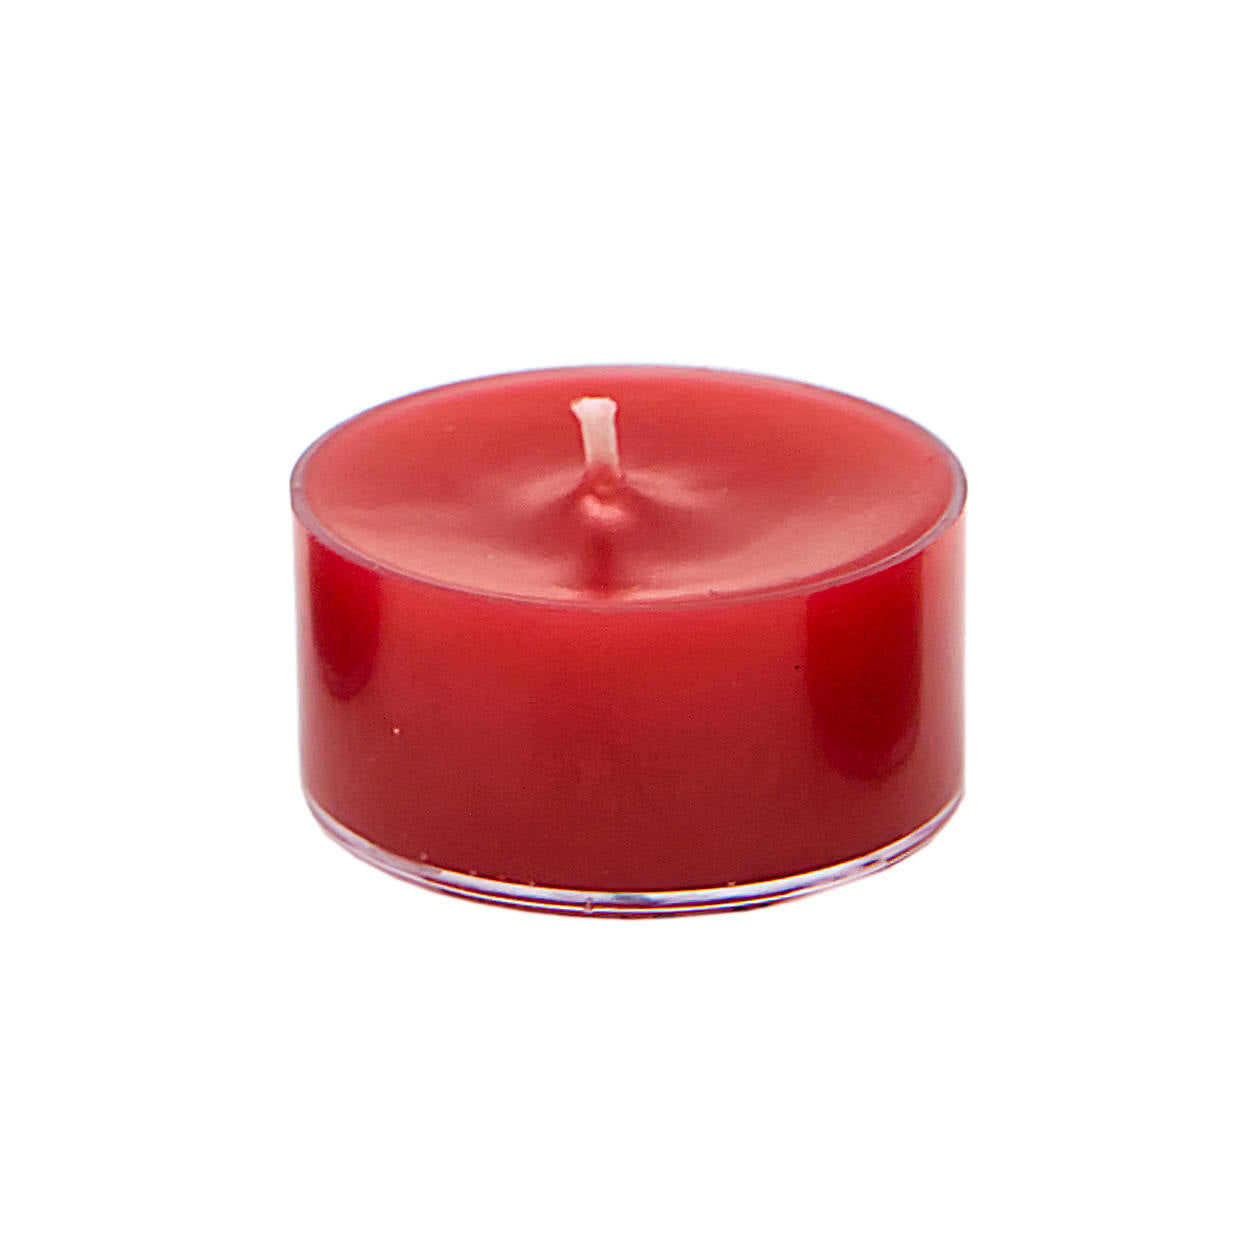 Juicy Watermelon Tealights Scented Candles